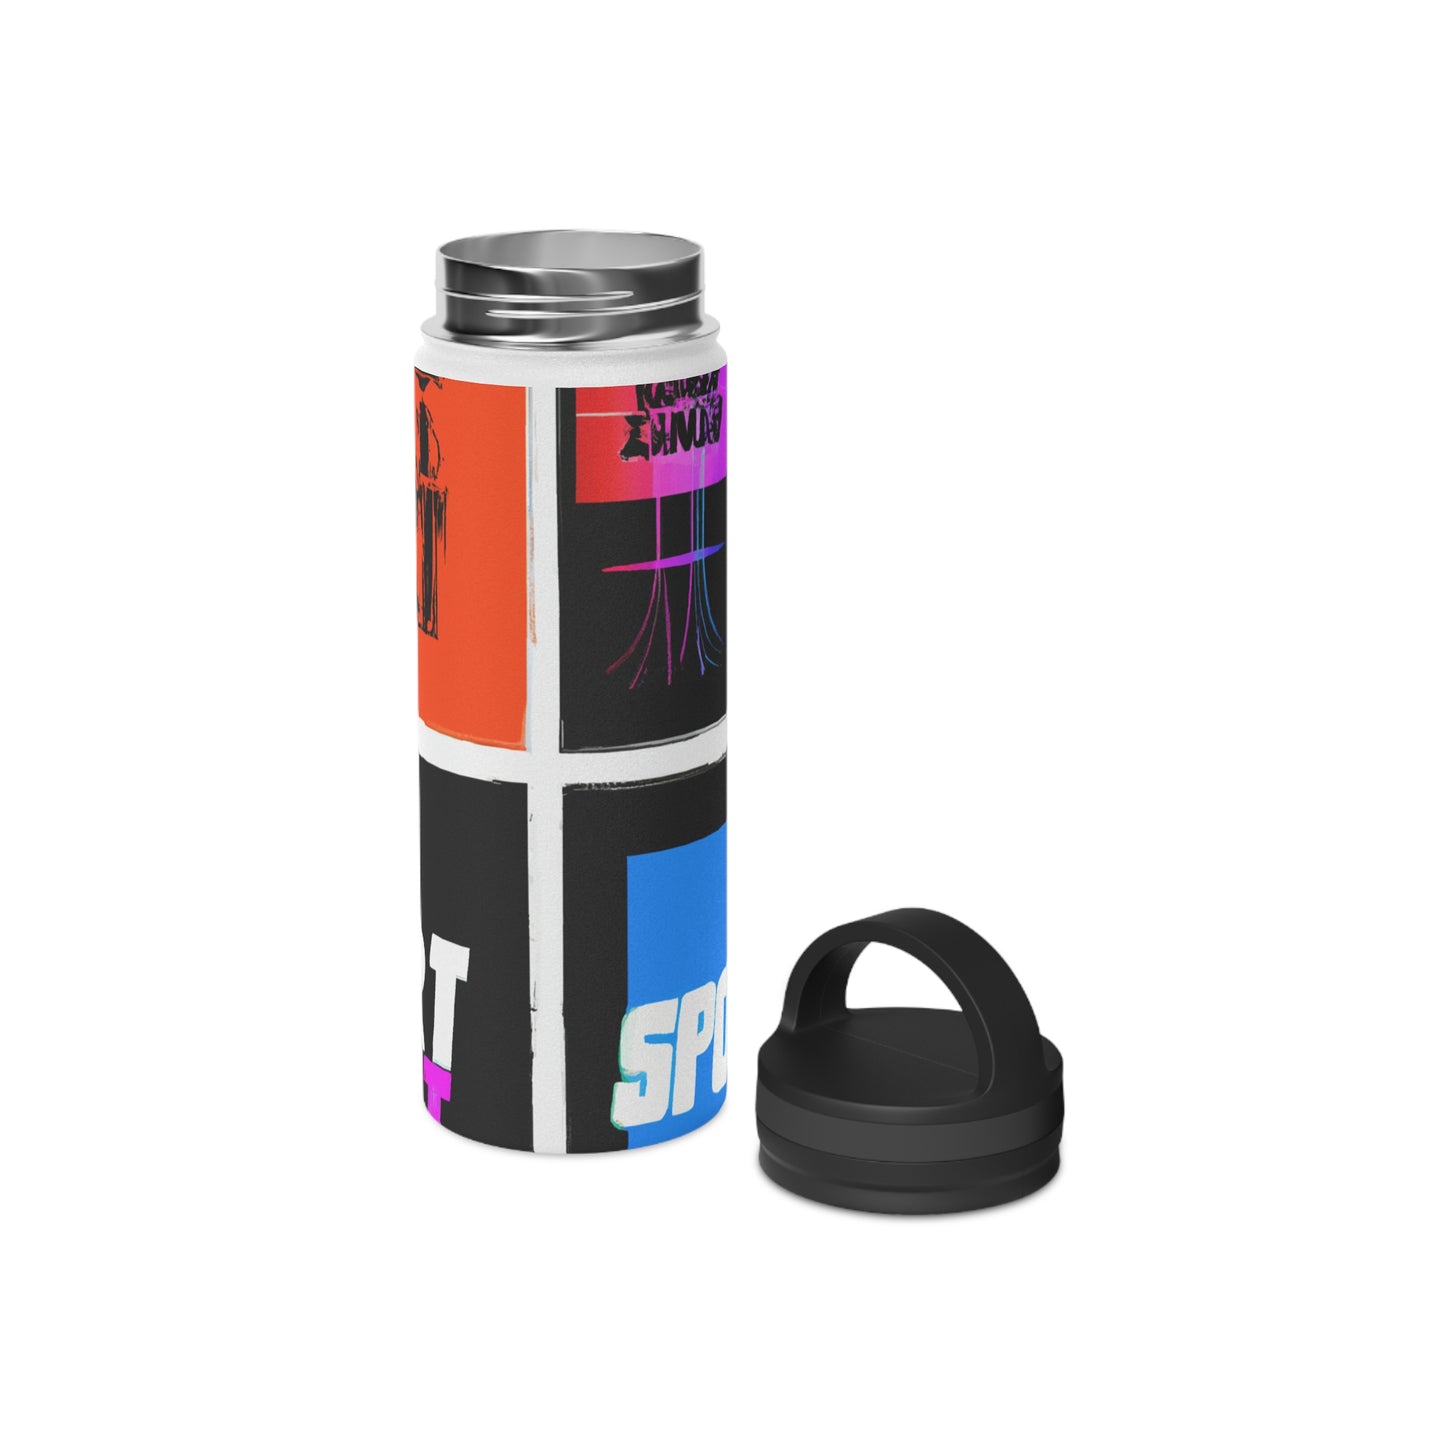 "Athletic Abstractions: Artistic Interpretations of the Sporting World" - Go Plus Stainless Steel Water Bottle, Handle Lid